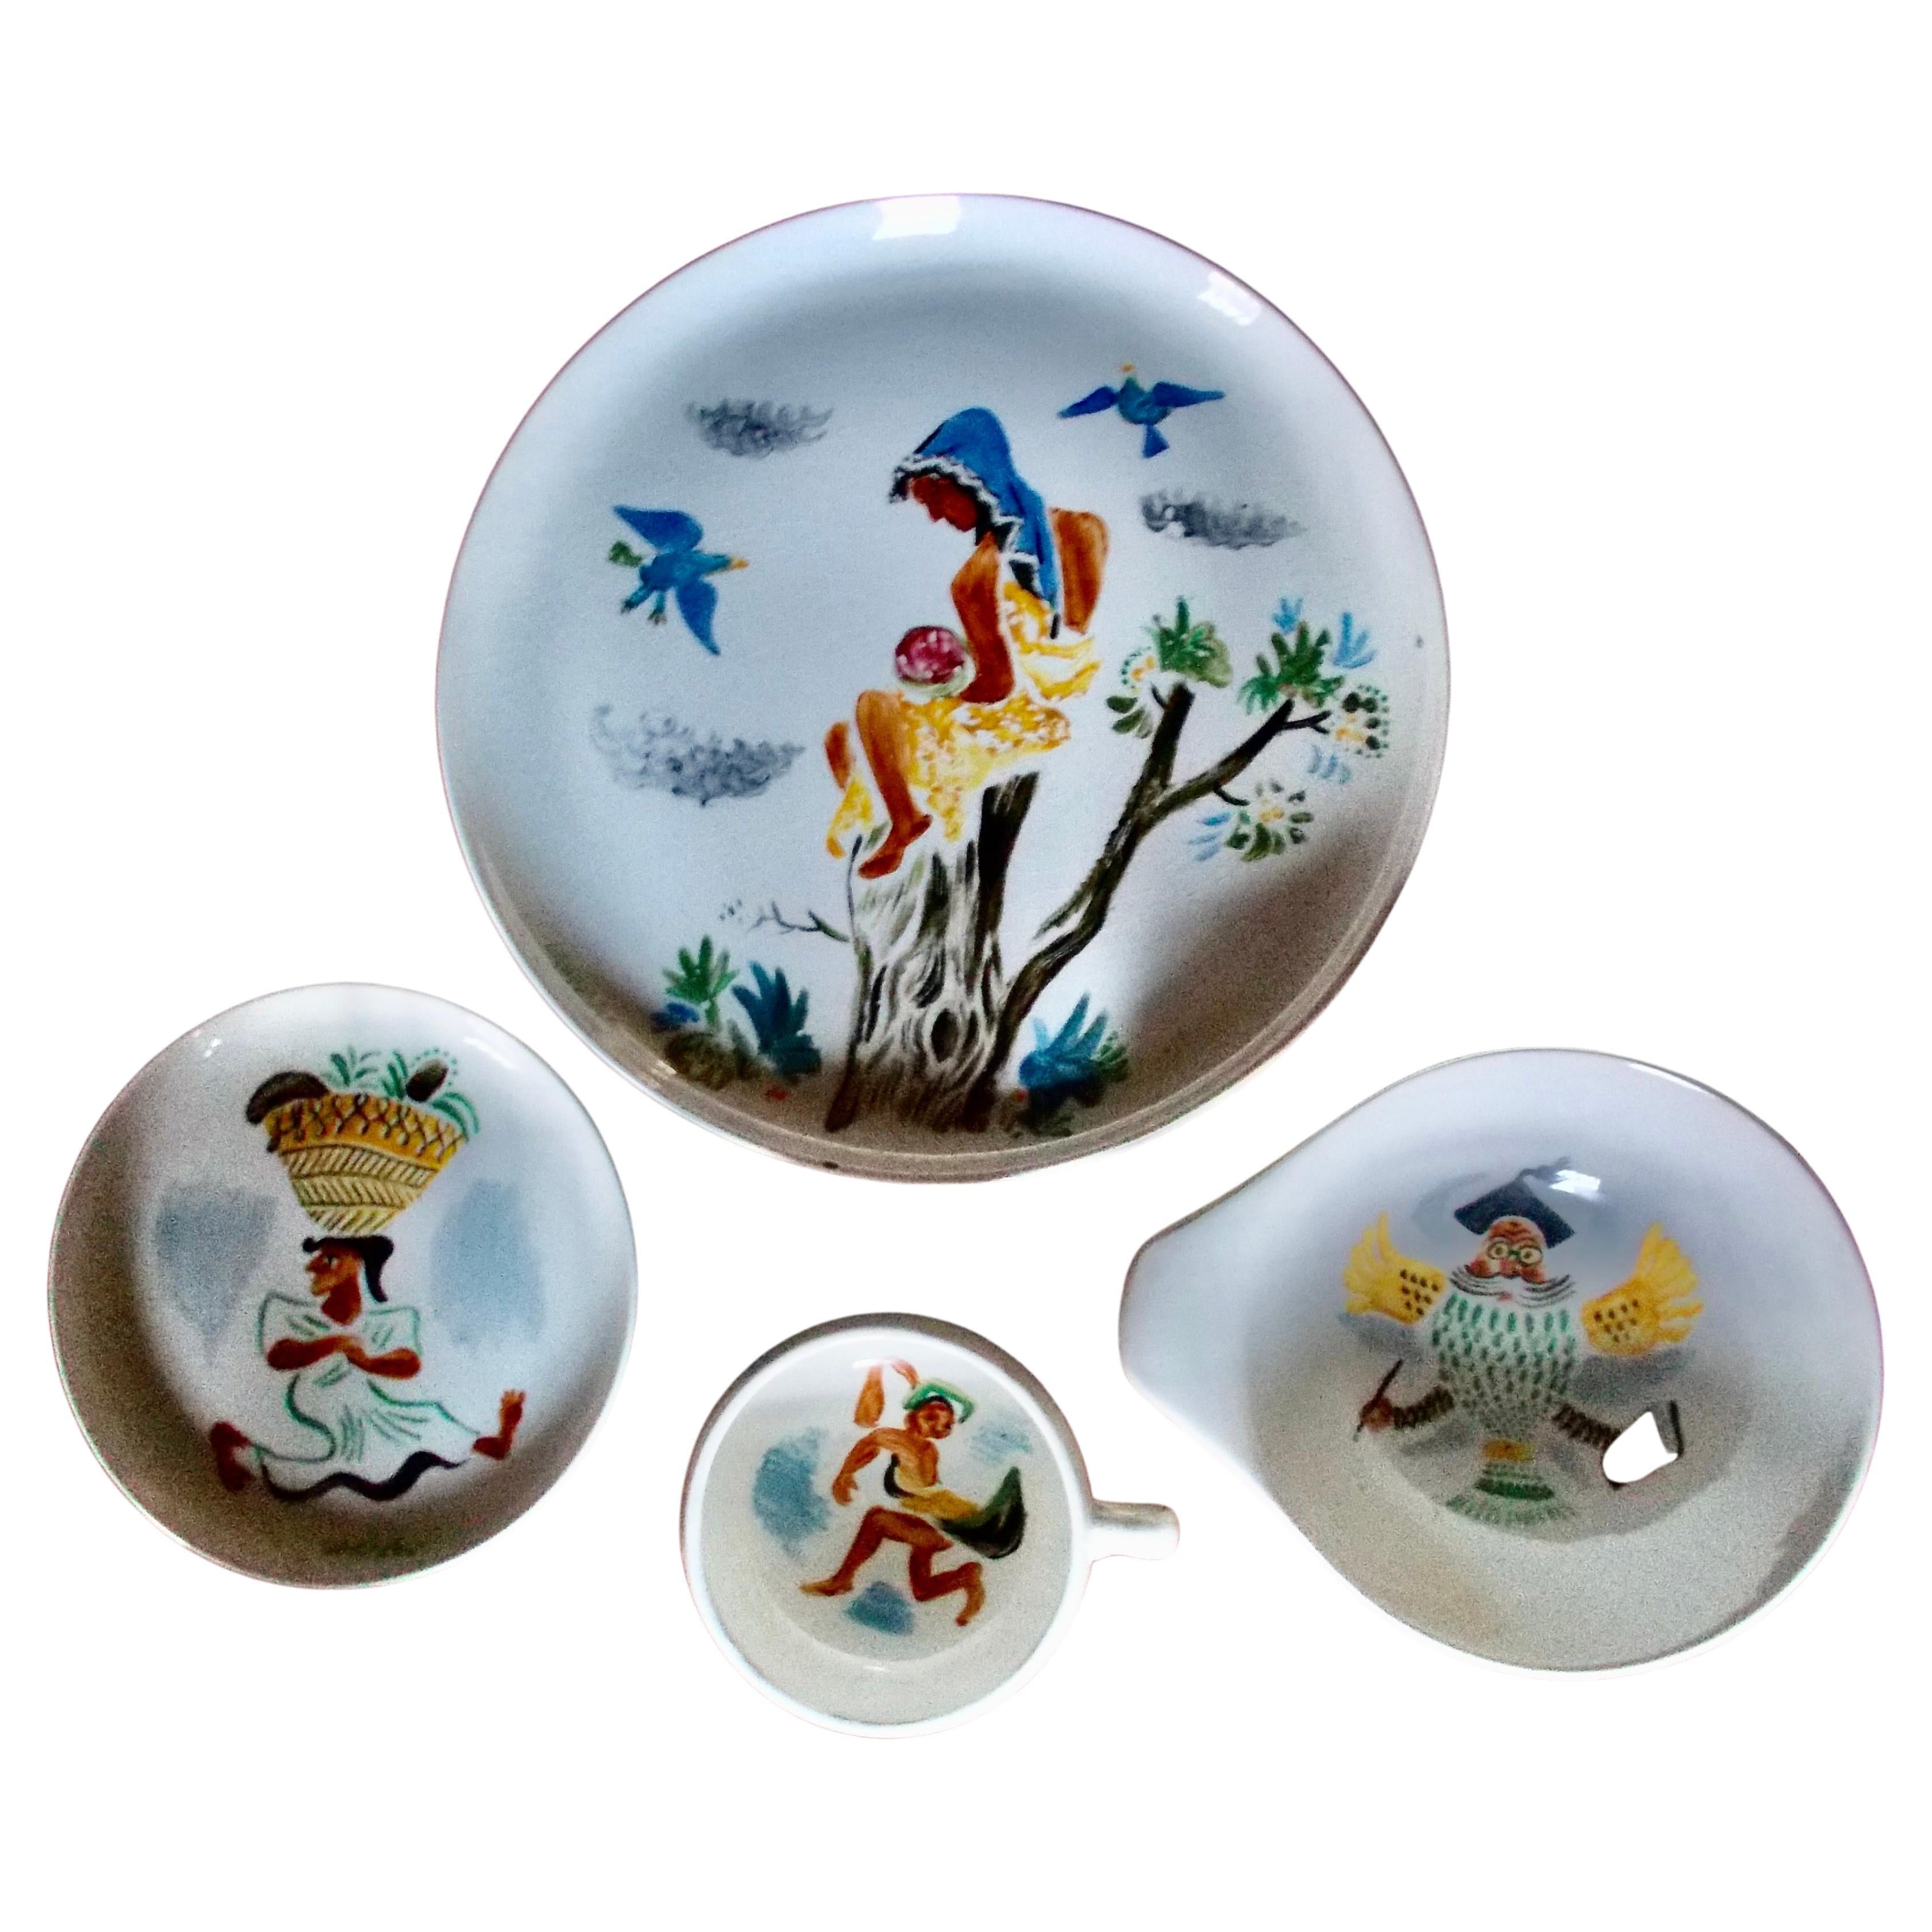 A set of four: cup, saucer, dinner plate and bowl, with paintings of mythological subjects on each by William Gropper. Russel Wright 